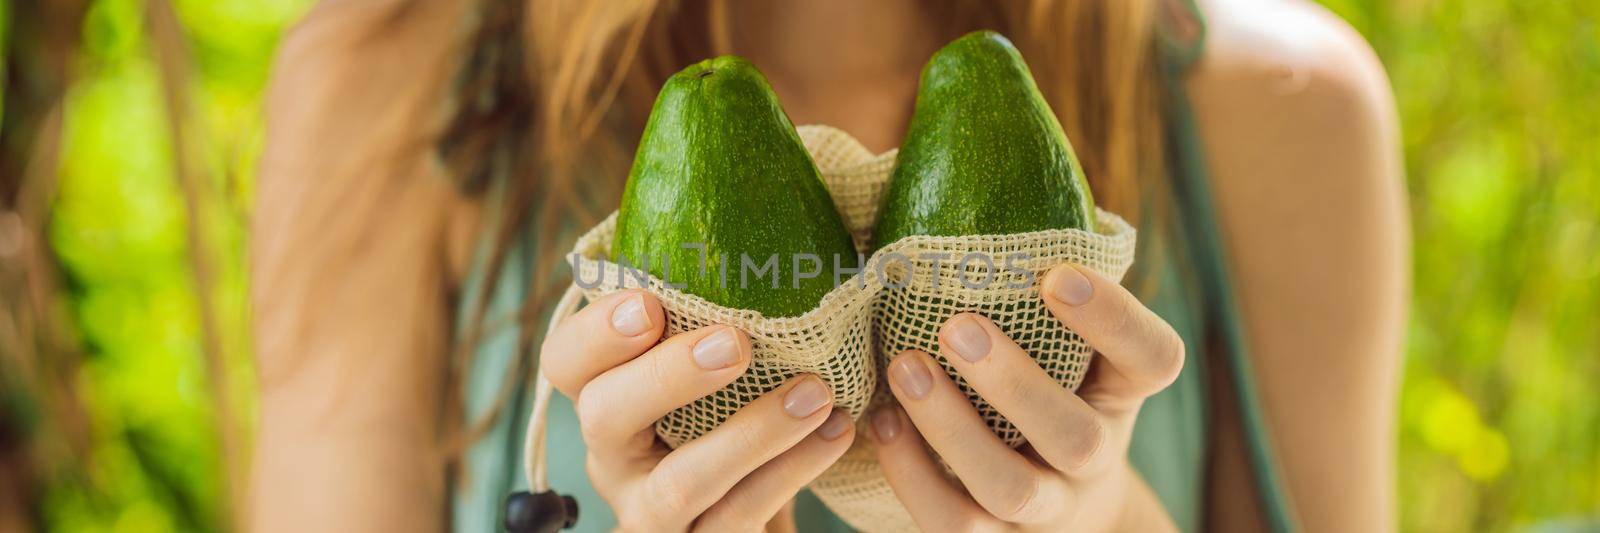 Avocado in a reusable bag in the hands of a young woman. Zero waste concept. BANNER, LONG FORMAT